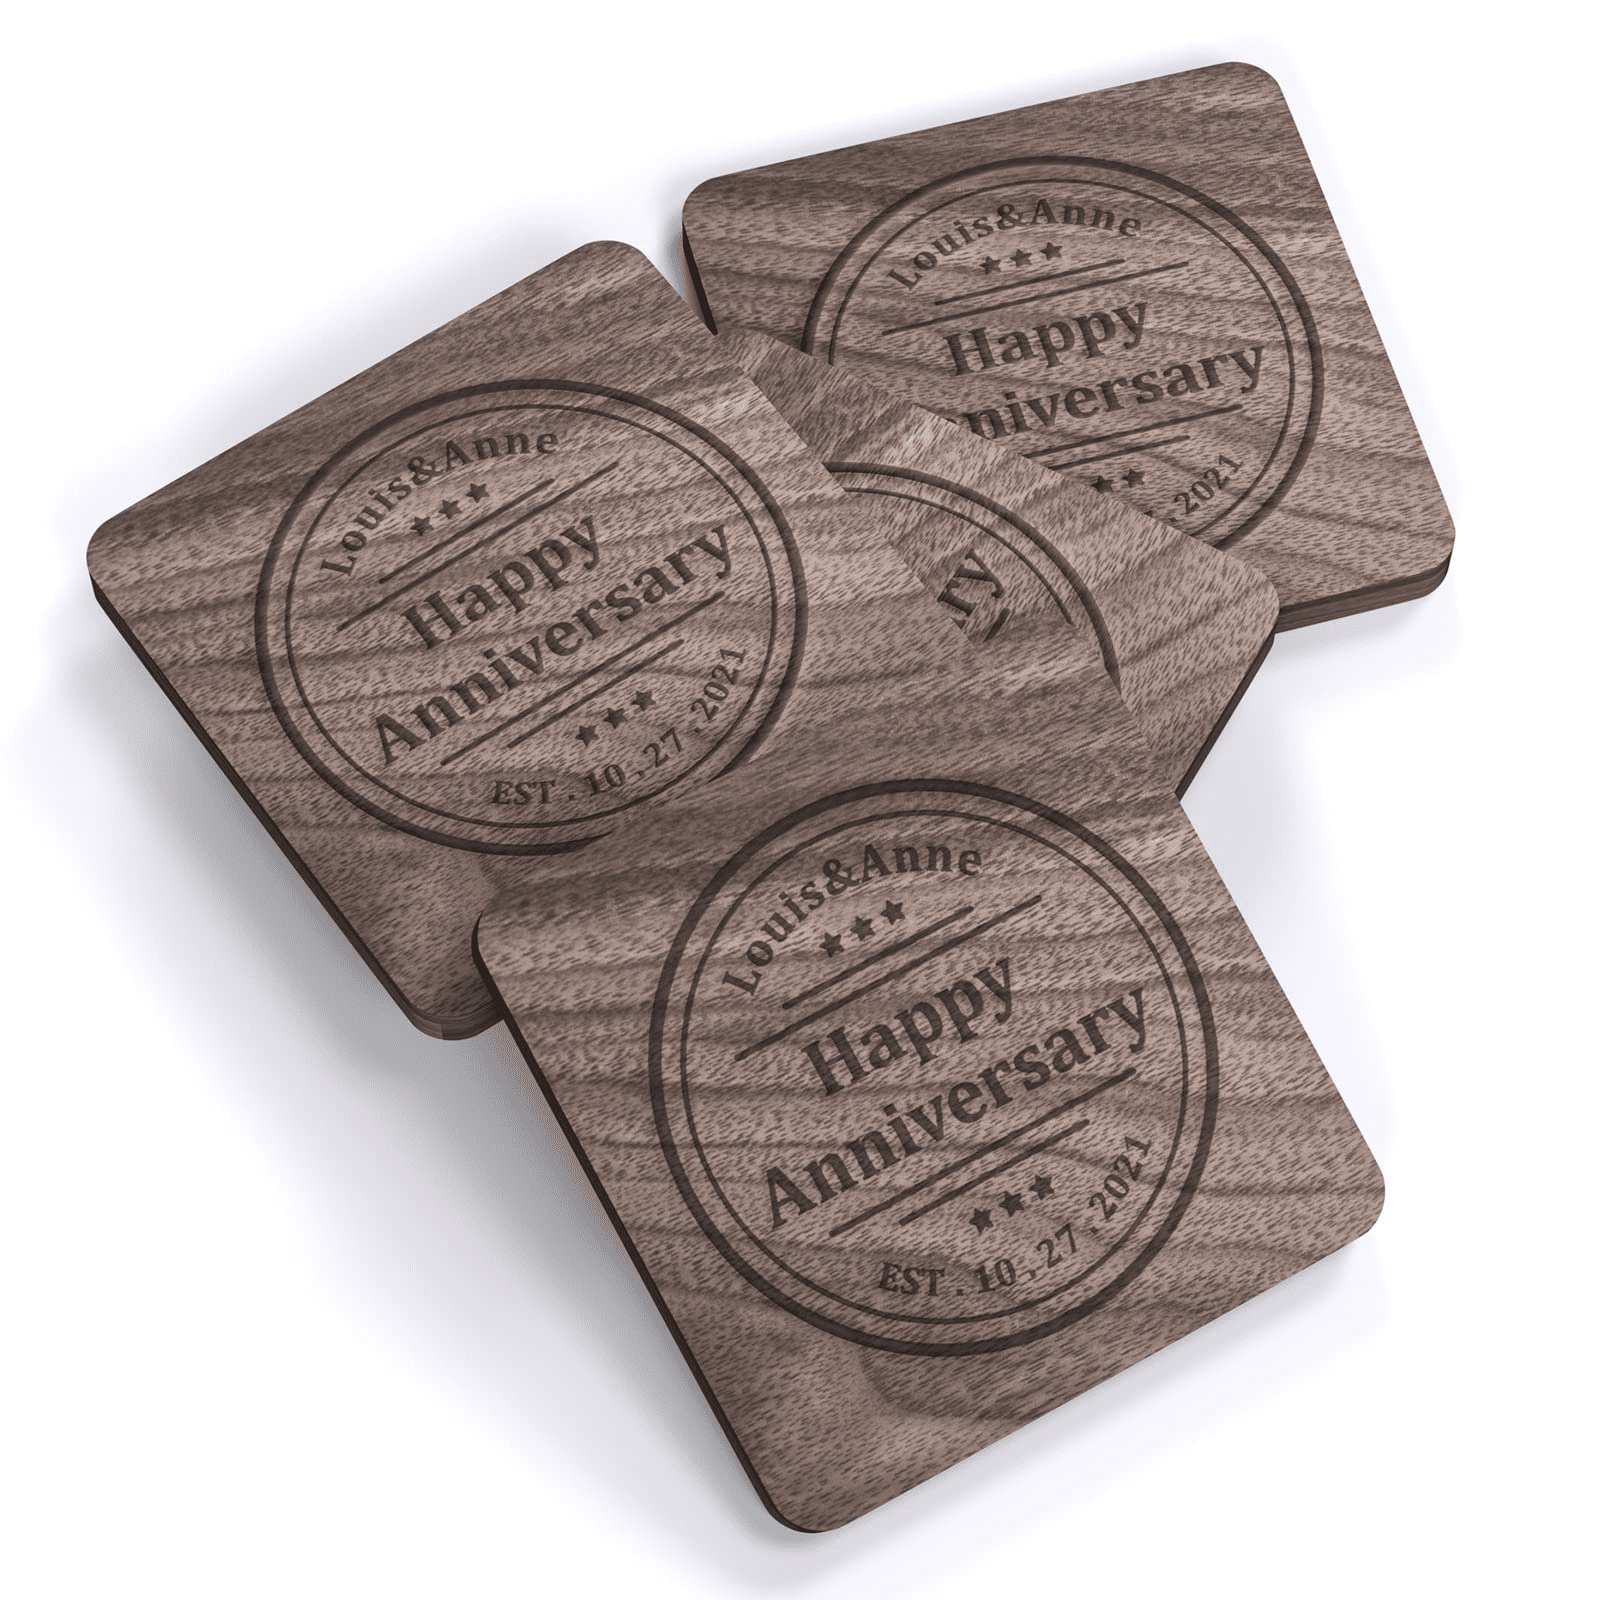 Set of 6 Personalized Coasters, Personalized Wedding Gift, Bamboo Coasters,  Wood Coasters, Wedding Gifts for Couple, Drink Coasters 